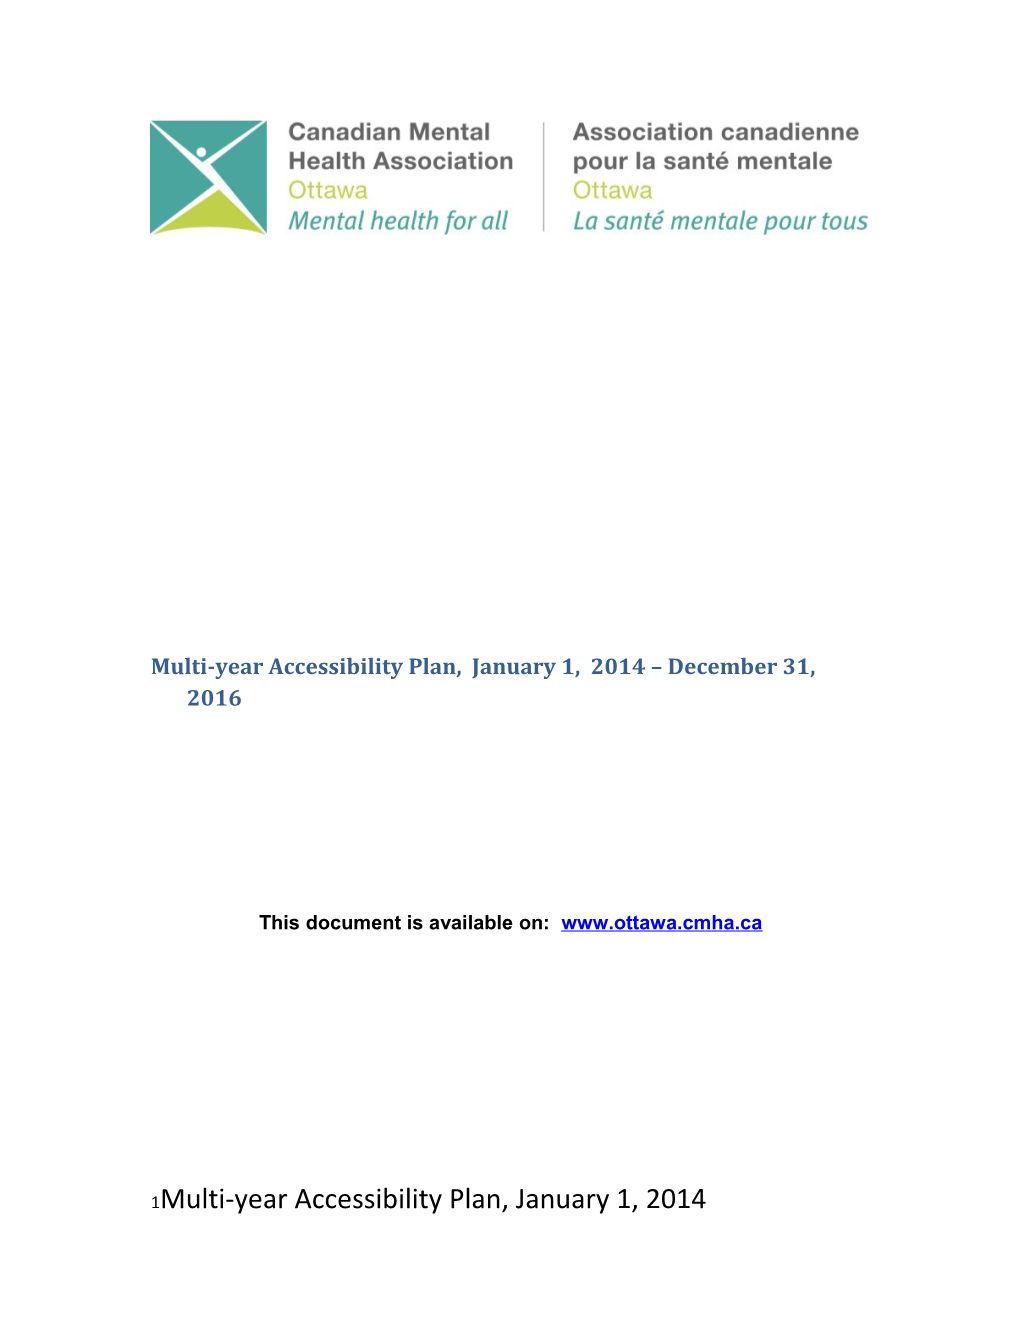 Multi-Year Accessibility Plan, January 1, 2014 December 31, 2016